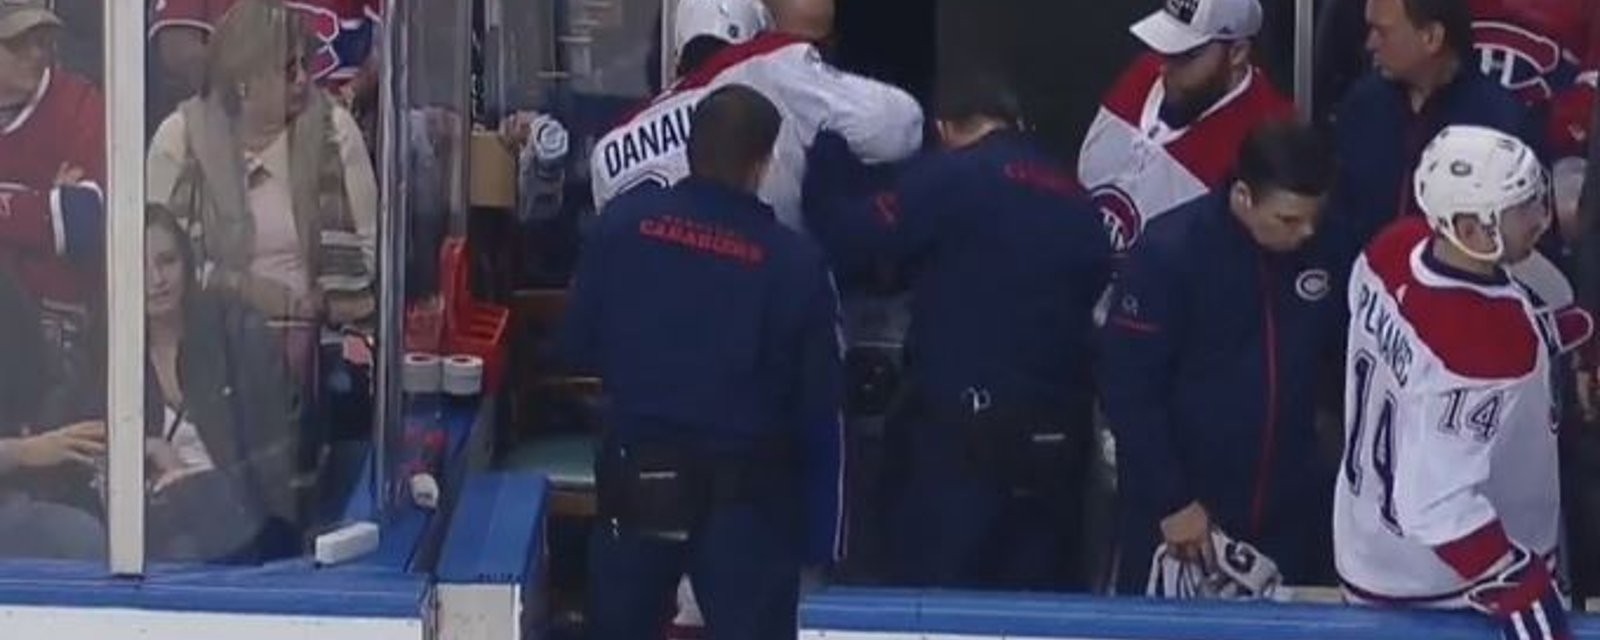 Breaking: Danault heads to dressing room with apparent leg injury 